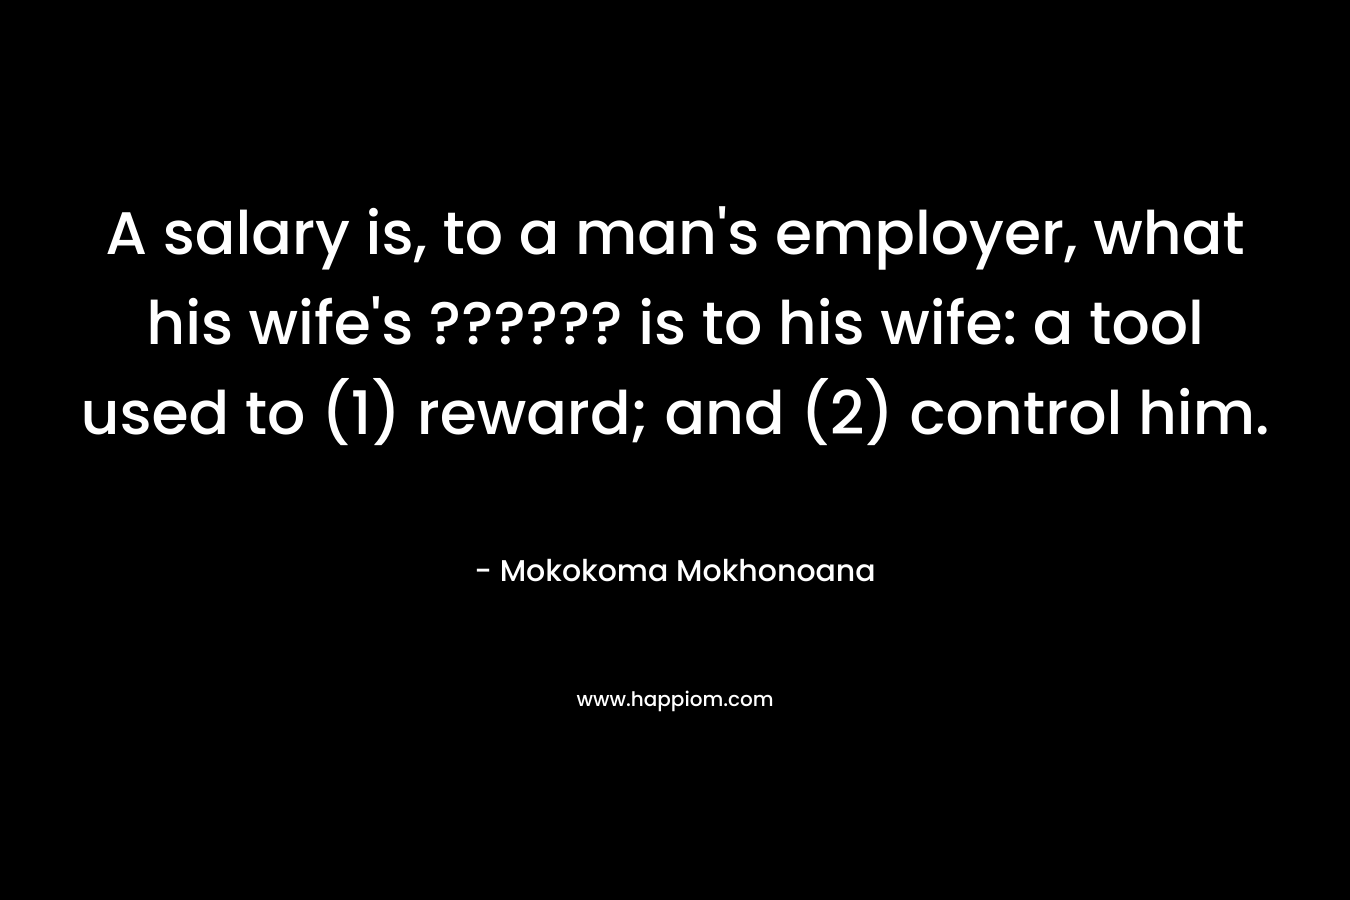 A salary is, to a man's employer, what his wife's ?????? is to his wife: a tool used to (1) reward; and (2) control him.